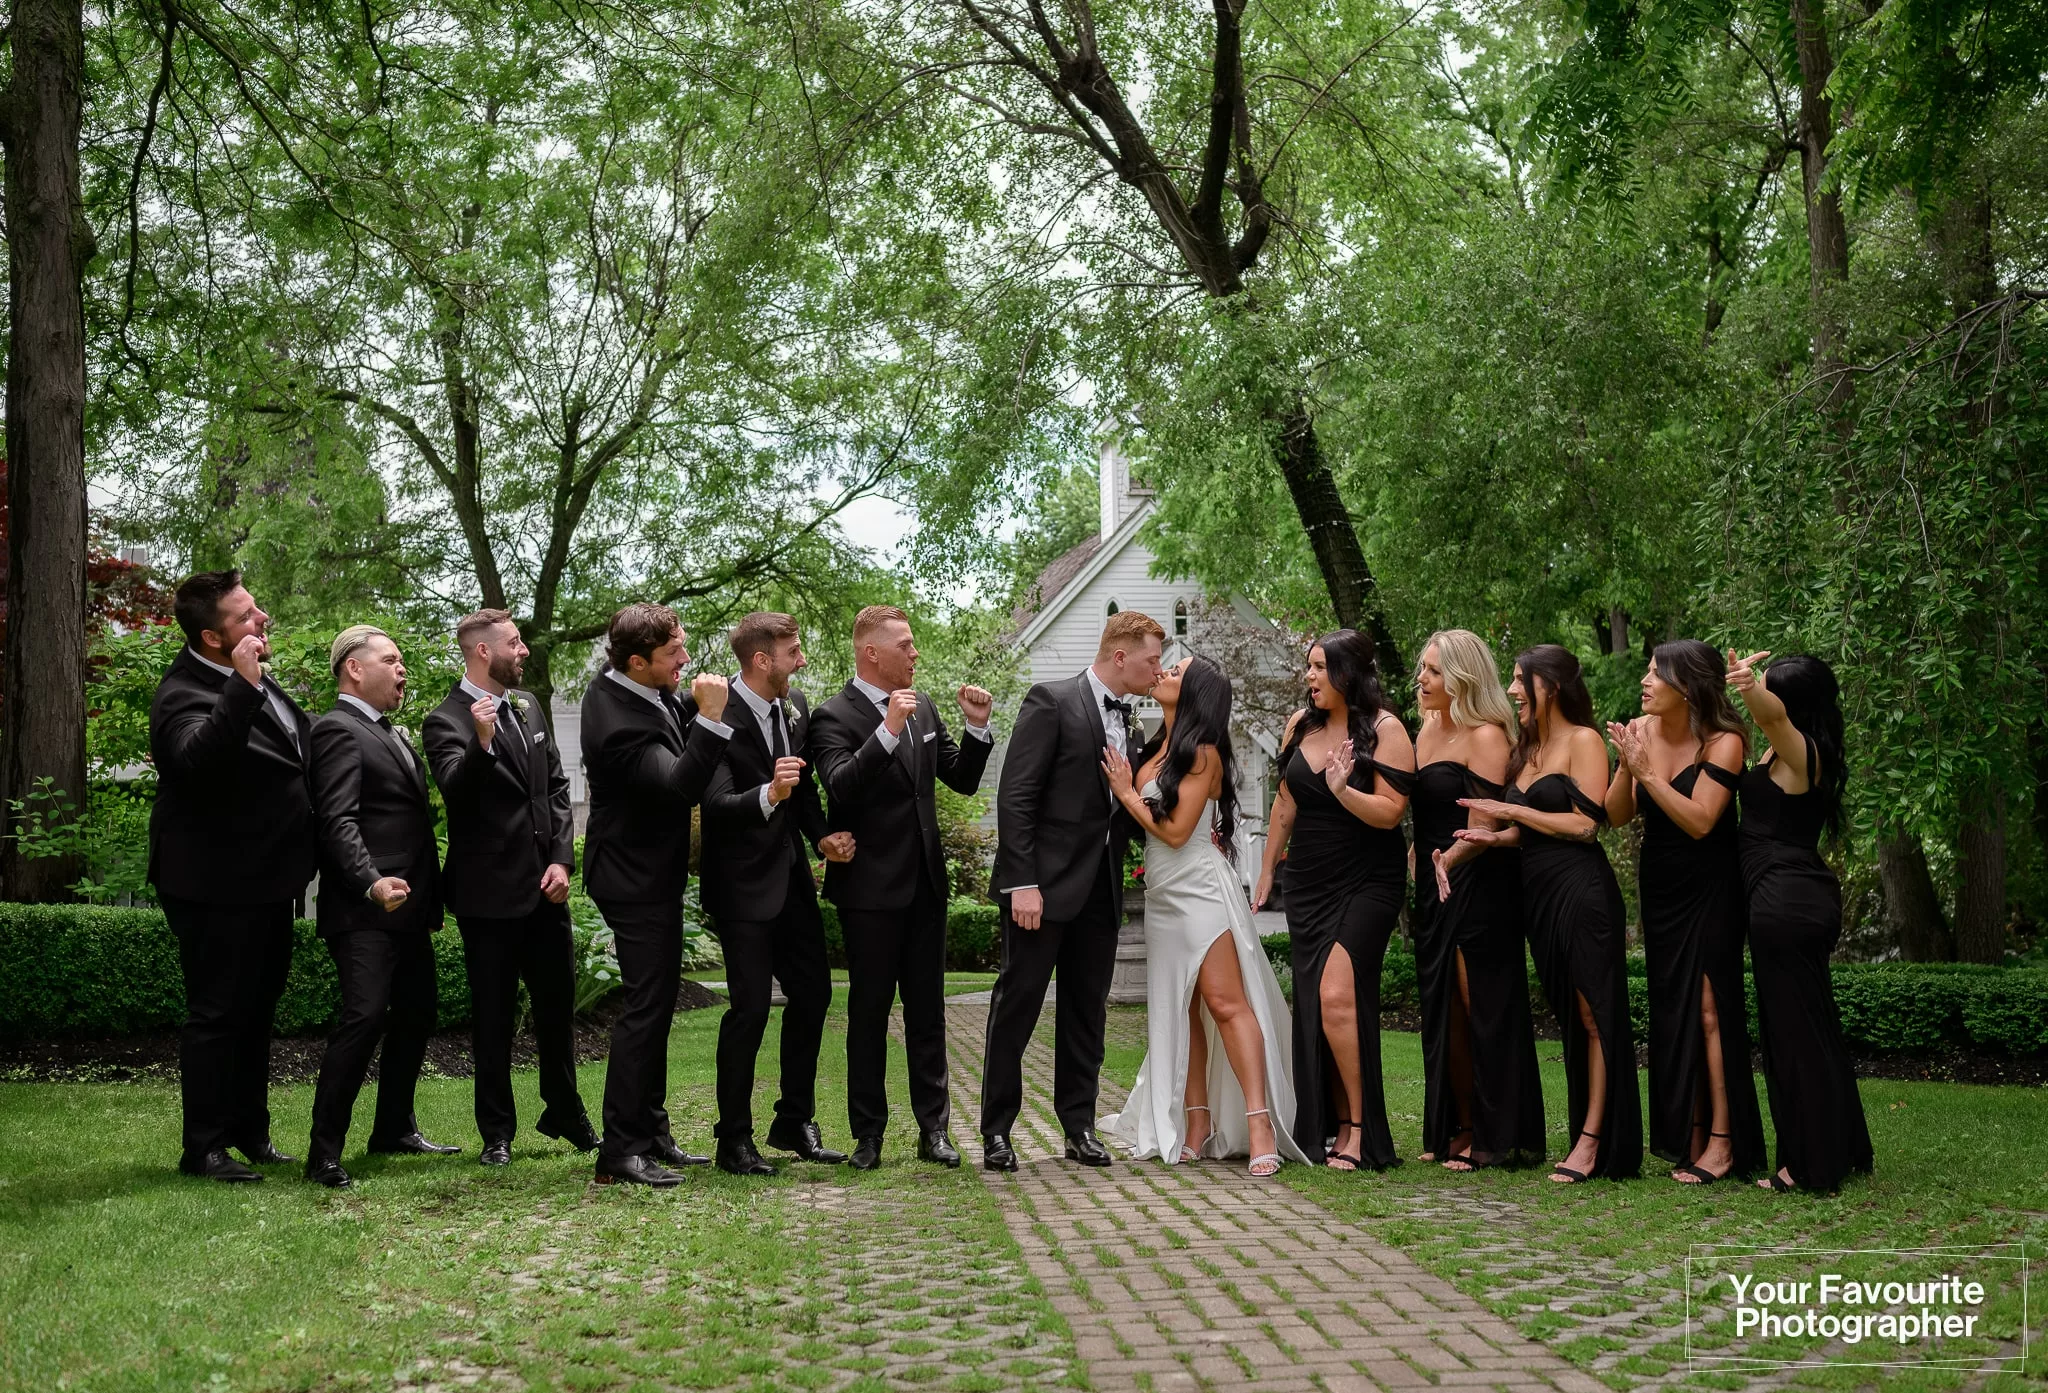 Formal photo of a wedding party of 13 people at The Doctor's House, all dressed in black and white outfits. The party celebrates as the couple shares a kiss.